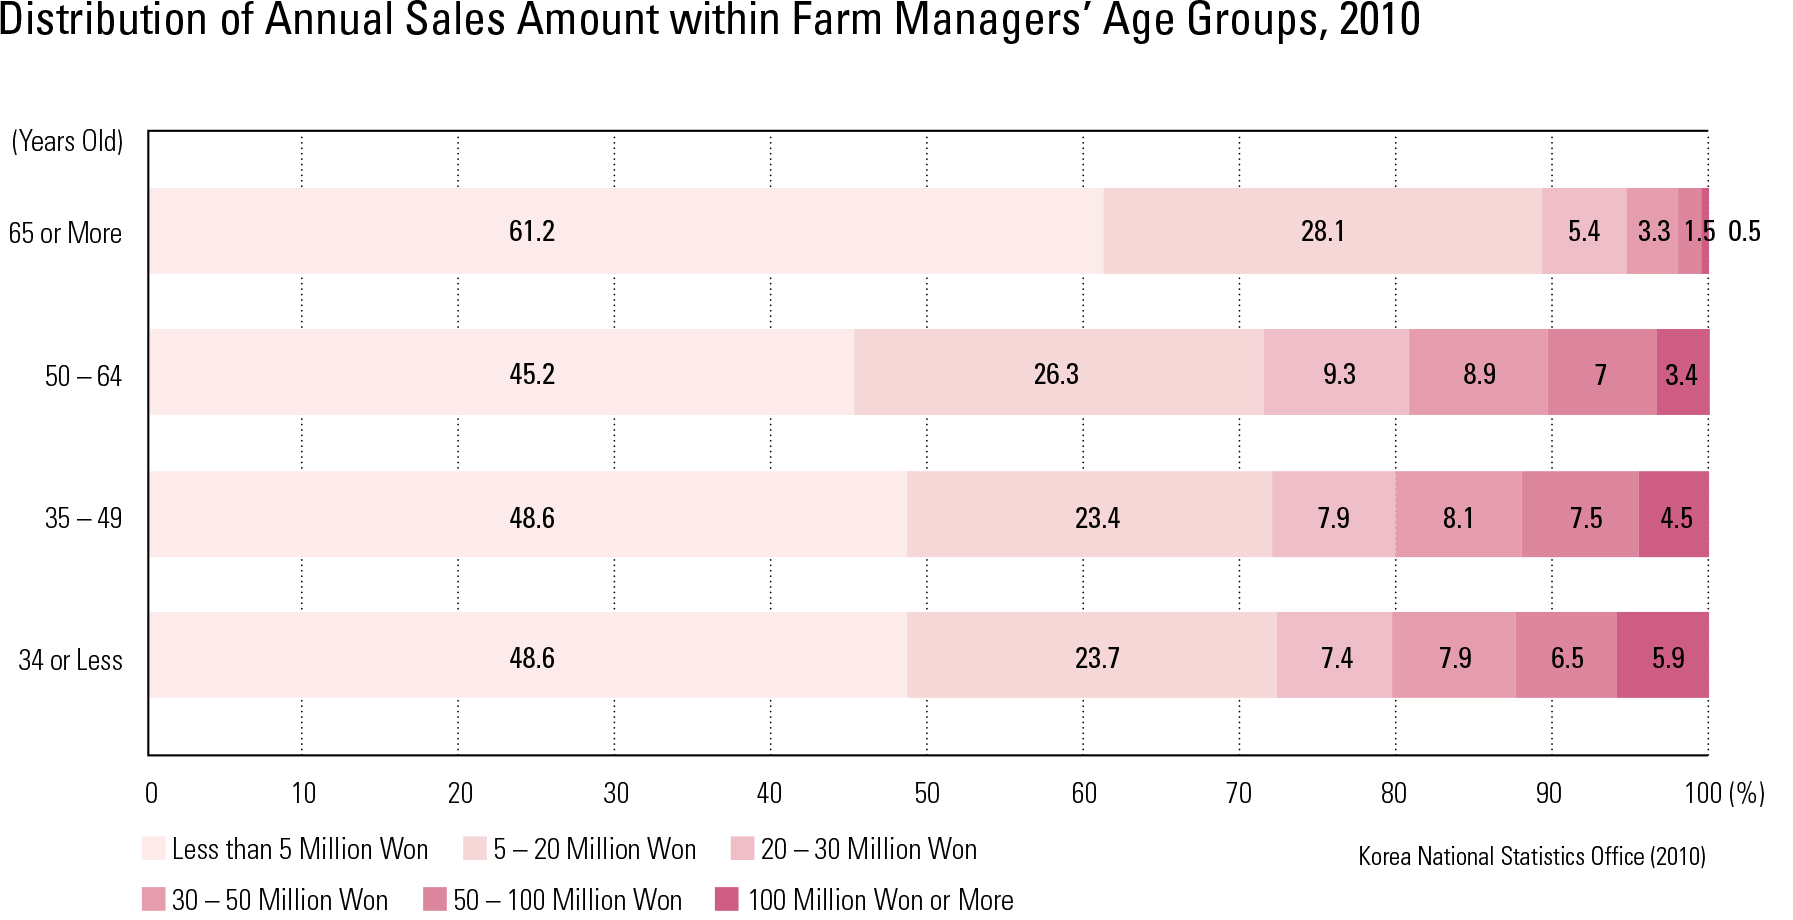 Distribution of Annual Sales Amount within Farm Managers’ Age Groups, 2010<p class="oz_zoom" zimg="http://imagedata.cafe24.com/us_3/us3_160-5_2.jpg"><span style="font-family:Nanum Myeongjo;"><span style="font-size:18px;"><span class="label label-danger">UPDATE DATA</span></span></p>